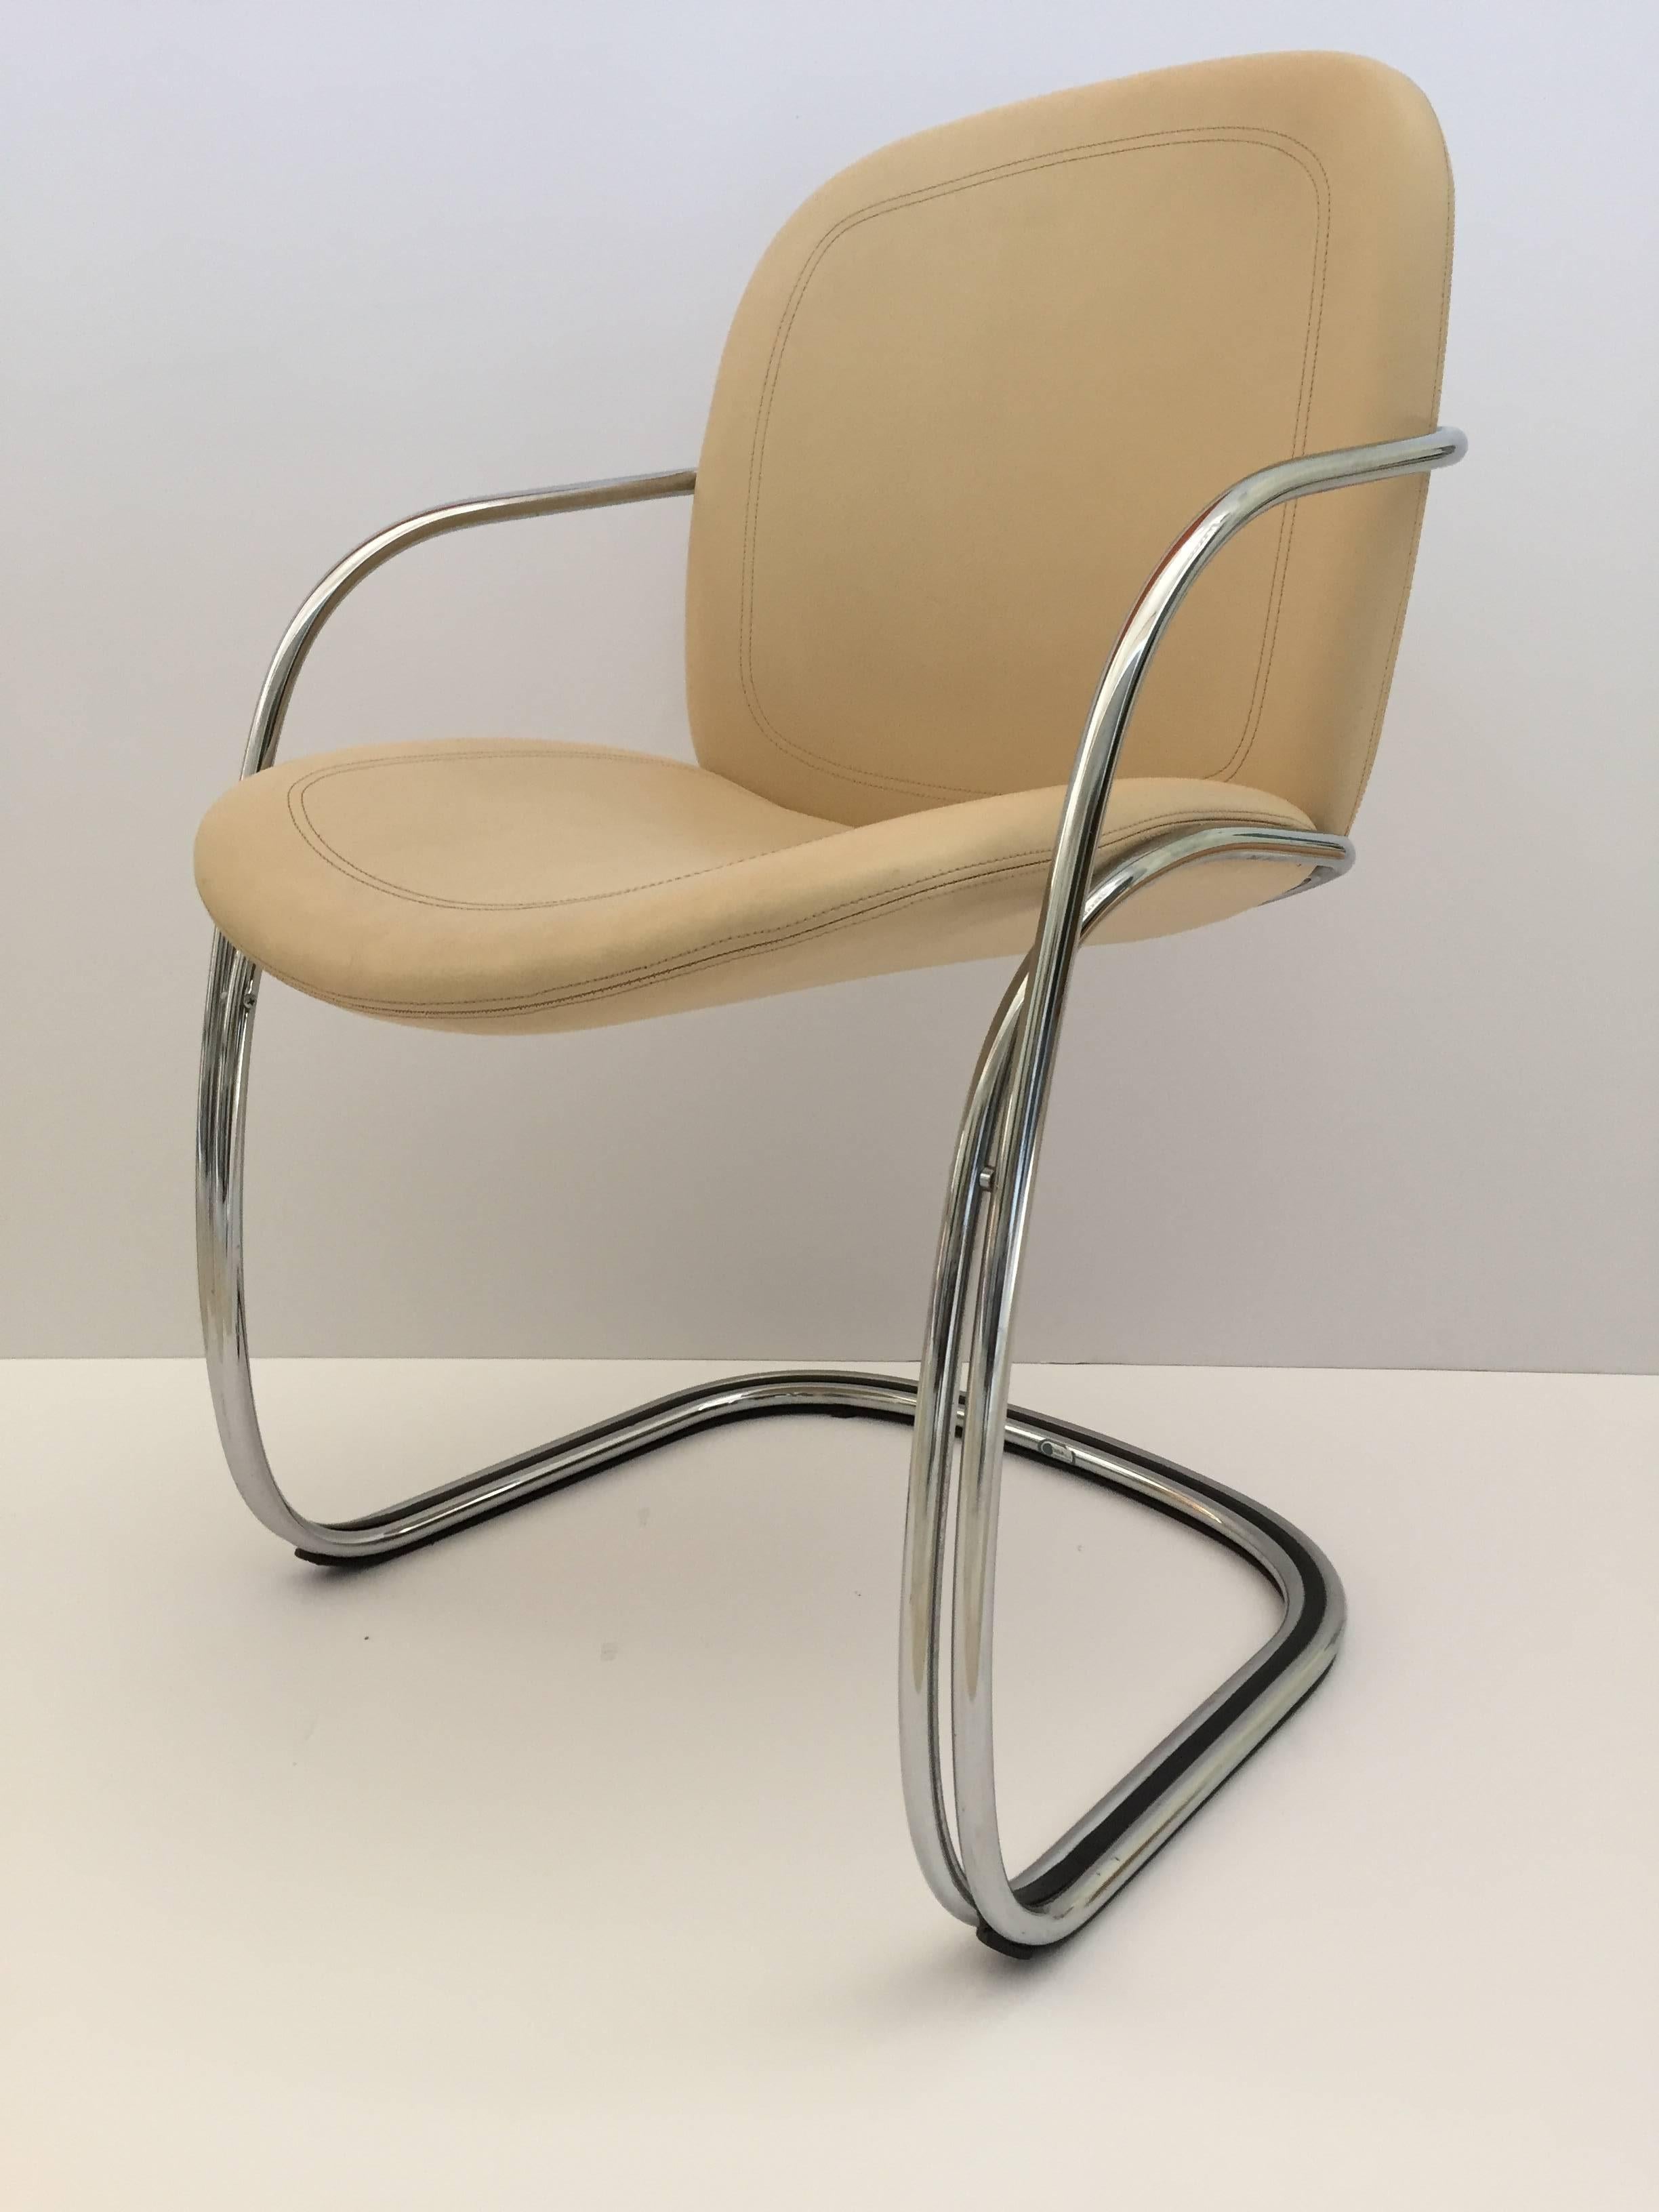 Gastone Rinaldi chrome and beige leather armchairs, set of four.
Gastone Rinaldi for RIMA, circa 1970s, he designed a number of metal chairs for RIMA, the company his father had established in 1916.
Gastone Rinaldi was an architect and designer from